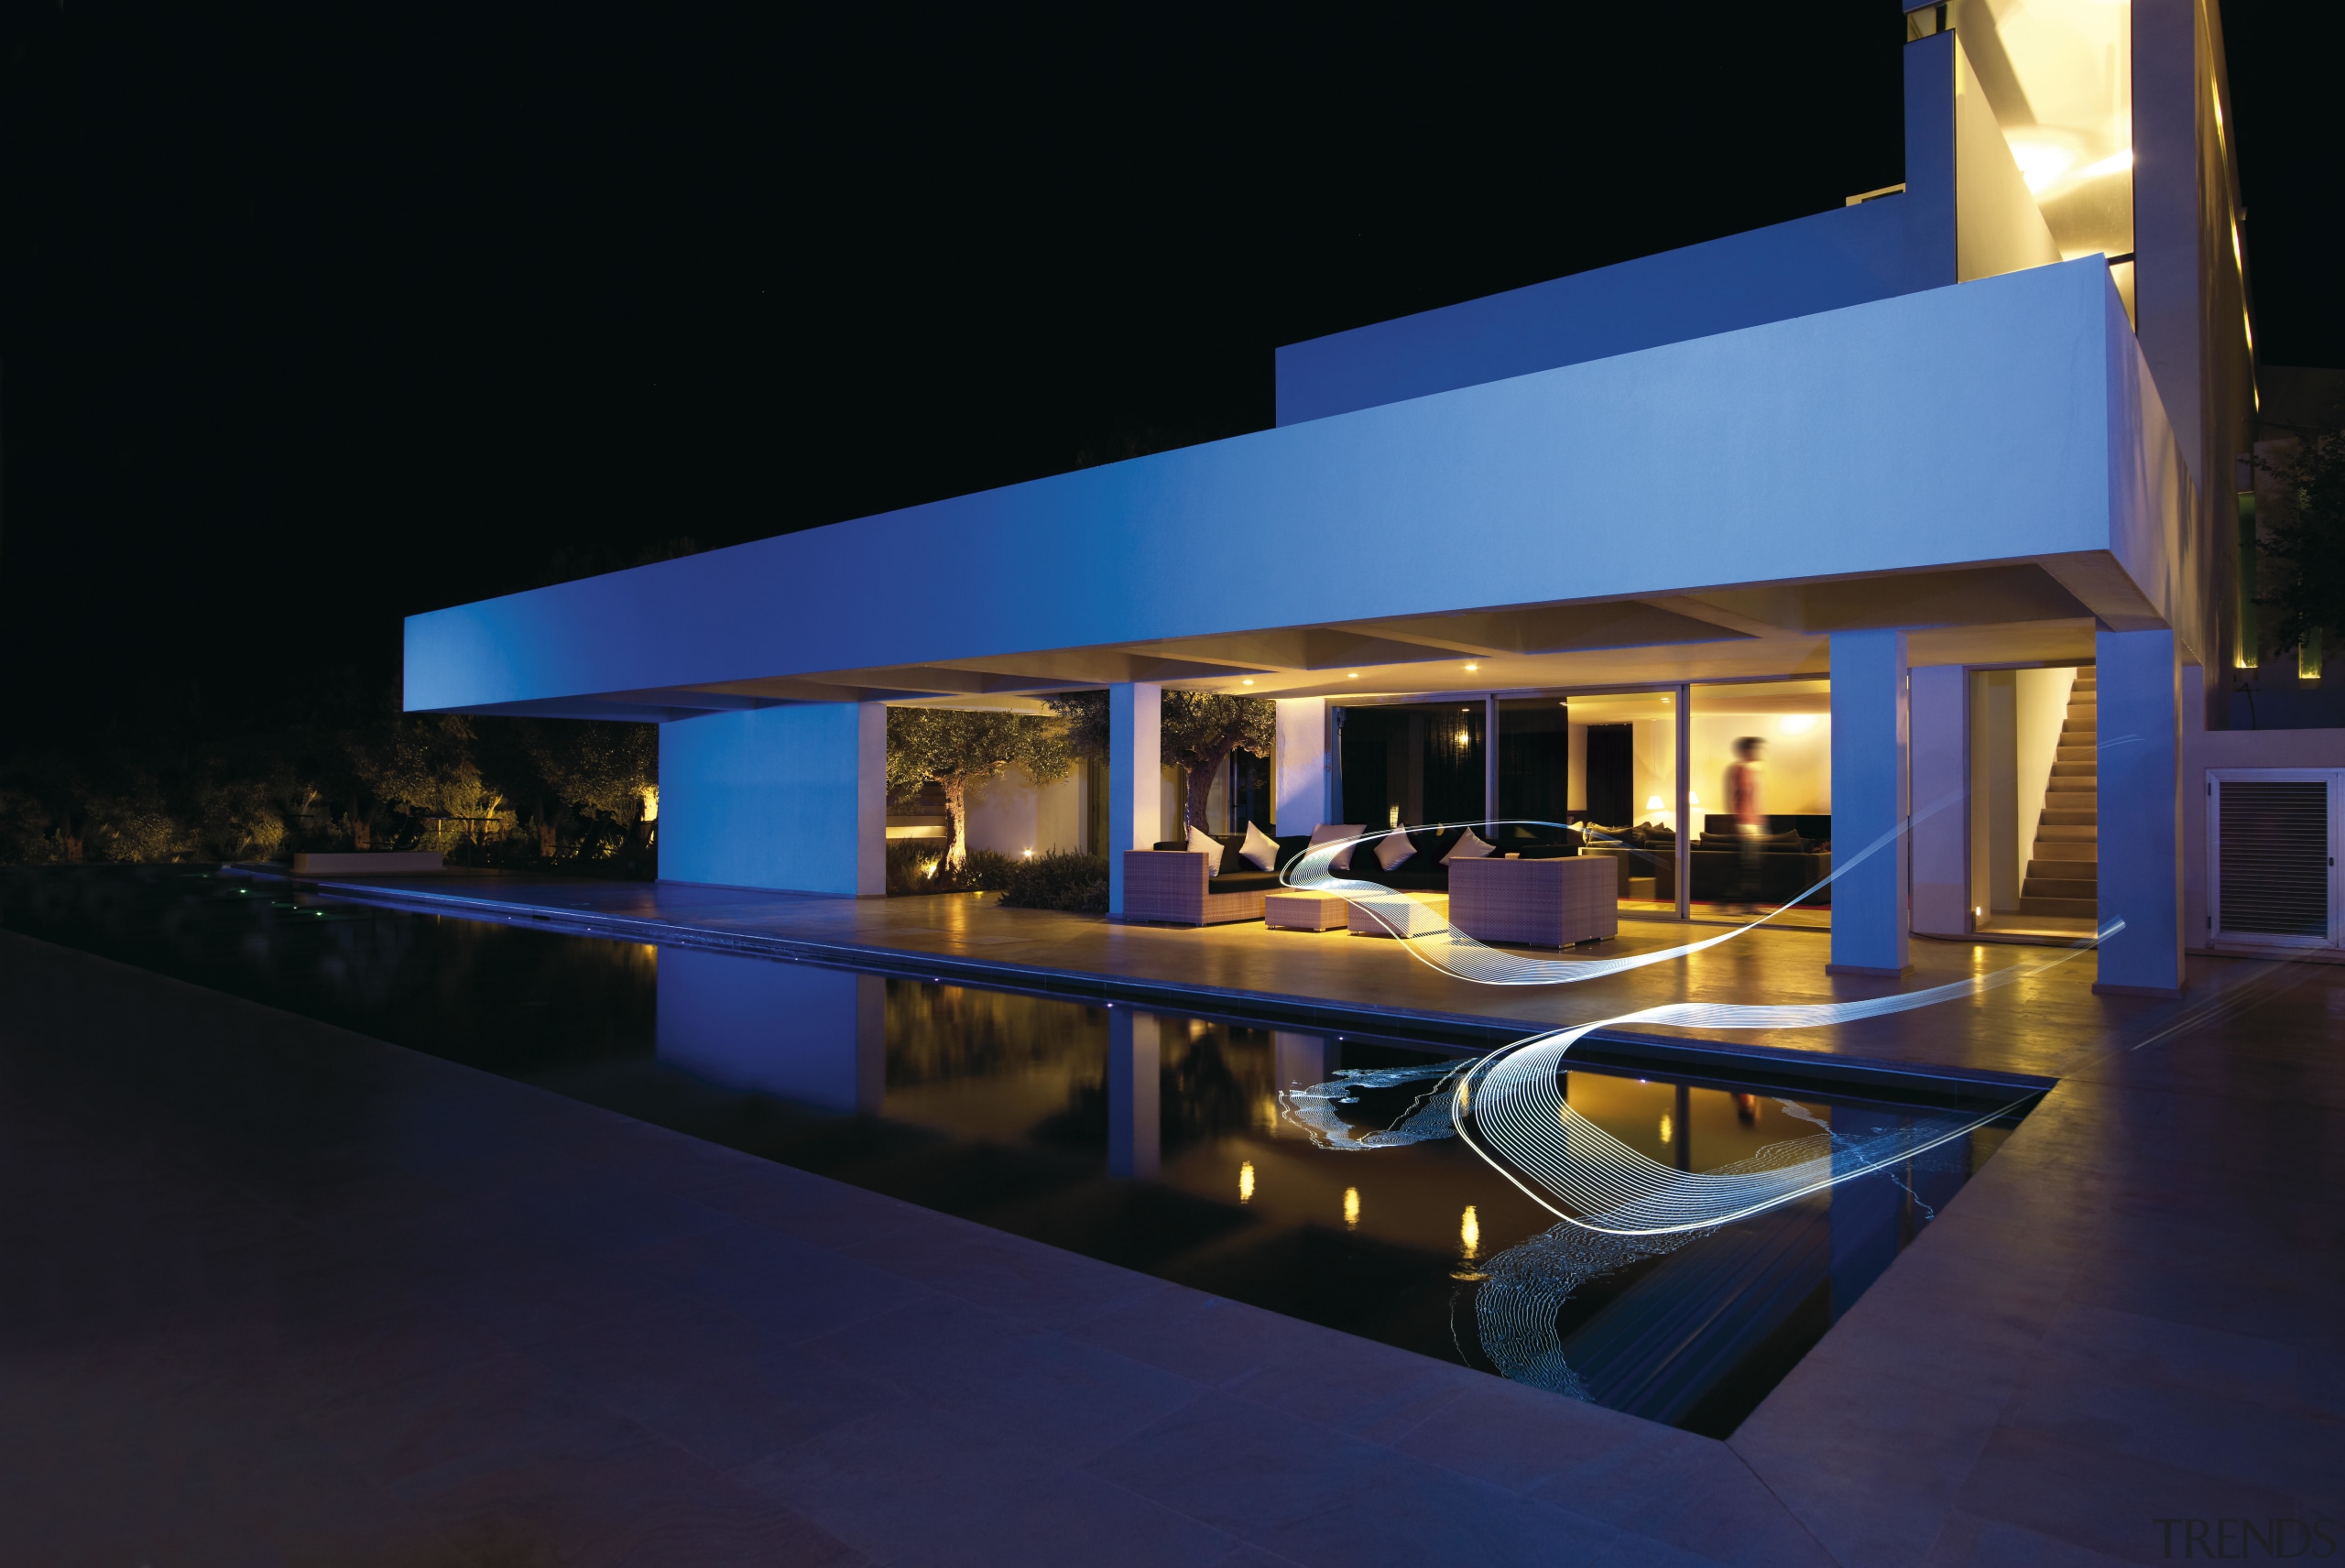 Exterior night shot of modern, white home with architecture, estate, home, house, lighting, property, real estate, reflection, swimming pool, water, black, blue